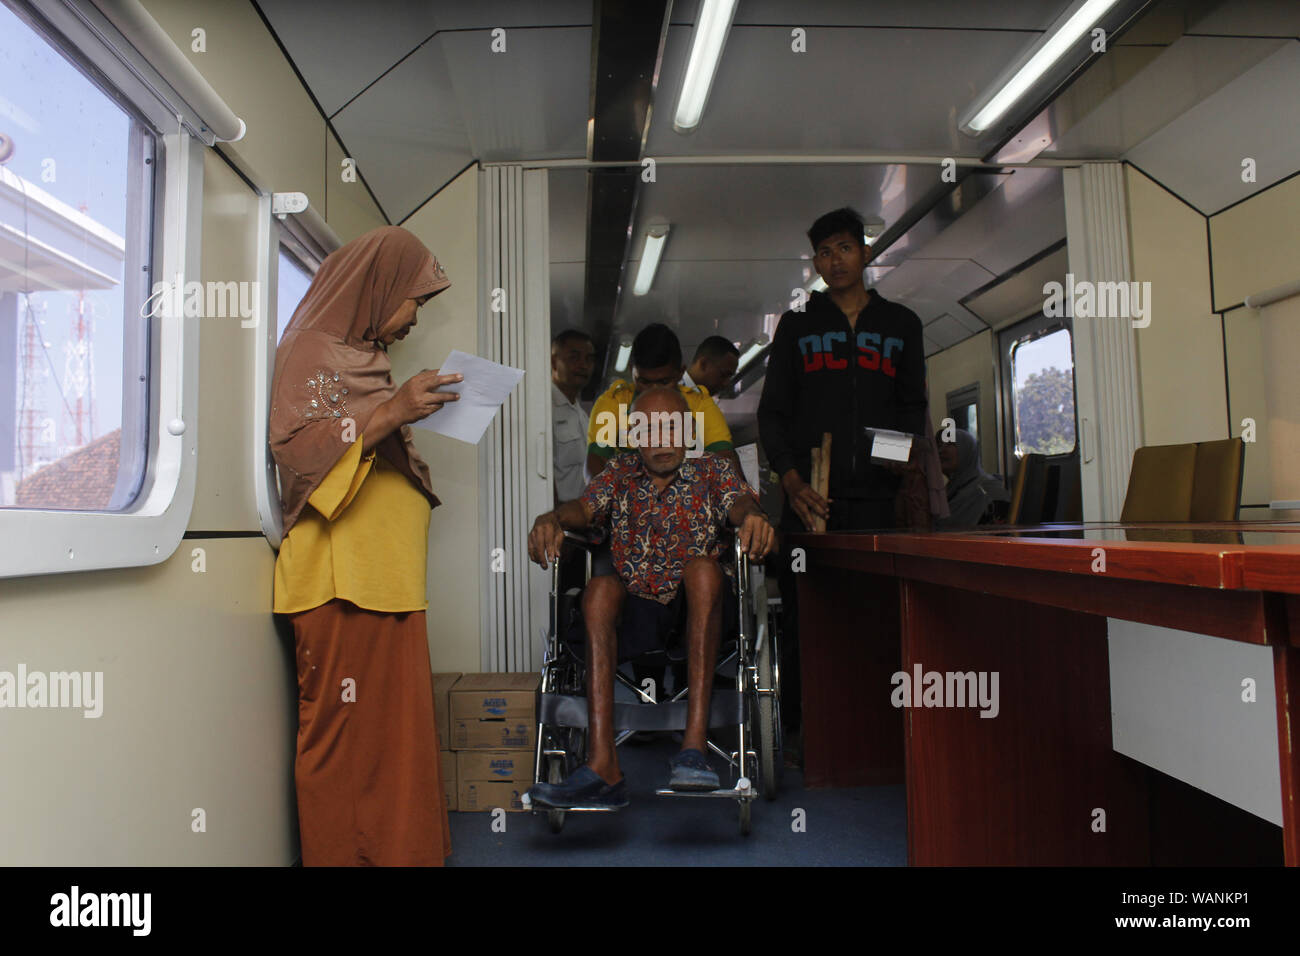 Madiun, Indonesia. 21st Aug, 2019. Officers assisted residents who were social service participants to the medical examination room above the Rail Clinic car at Saradan Station, Madiun Regency, Wednesday, August 21, 2019. Dozens of 7 Madiun Operational Area officers consisted of railfans, pharmacists and medical personnel serving various health complaints felt around 300 people get free medical treatment each year by PT. Indonesian Railways (Photo by Ajun Ally/Pacific Press) Credit: Pacific Press Agency/Alamy Live News Stock Photo